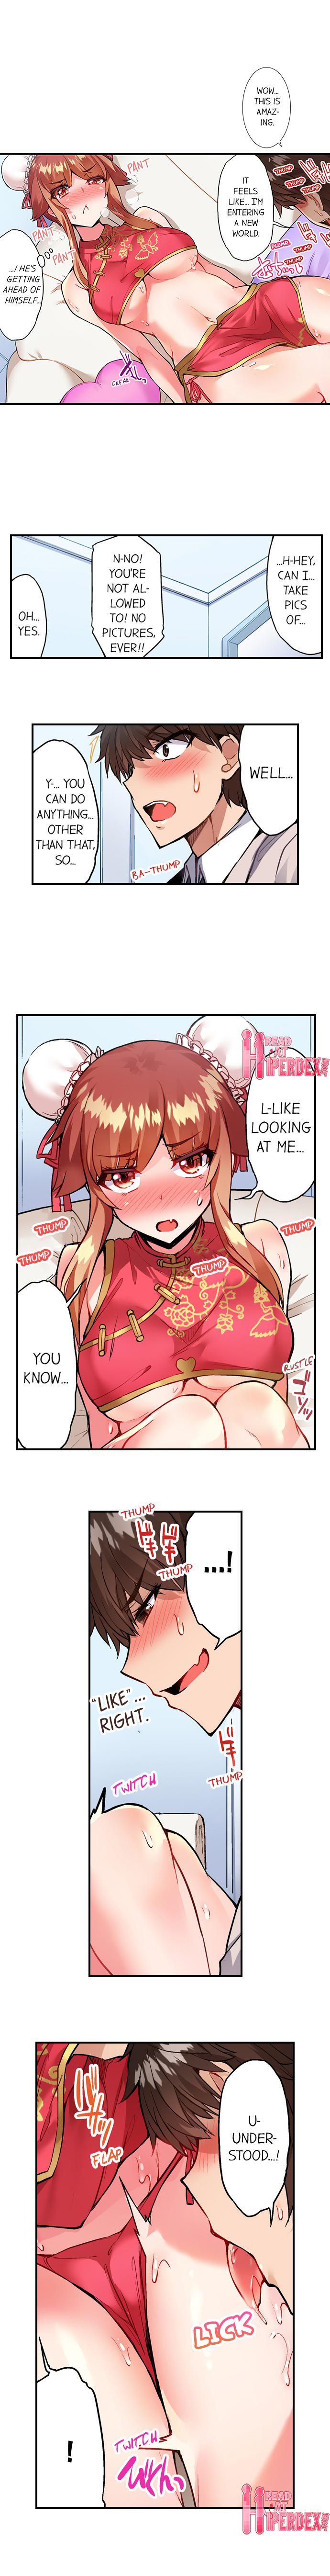 Traditional Job of Washing Girls’ Body - Chapter 112 Page 9